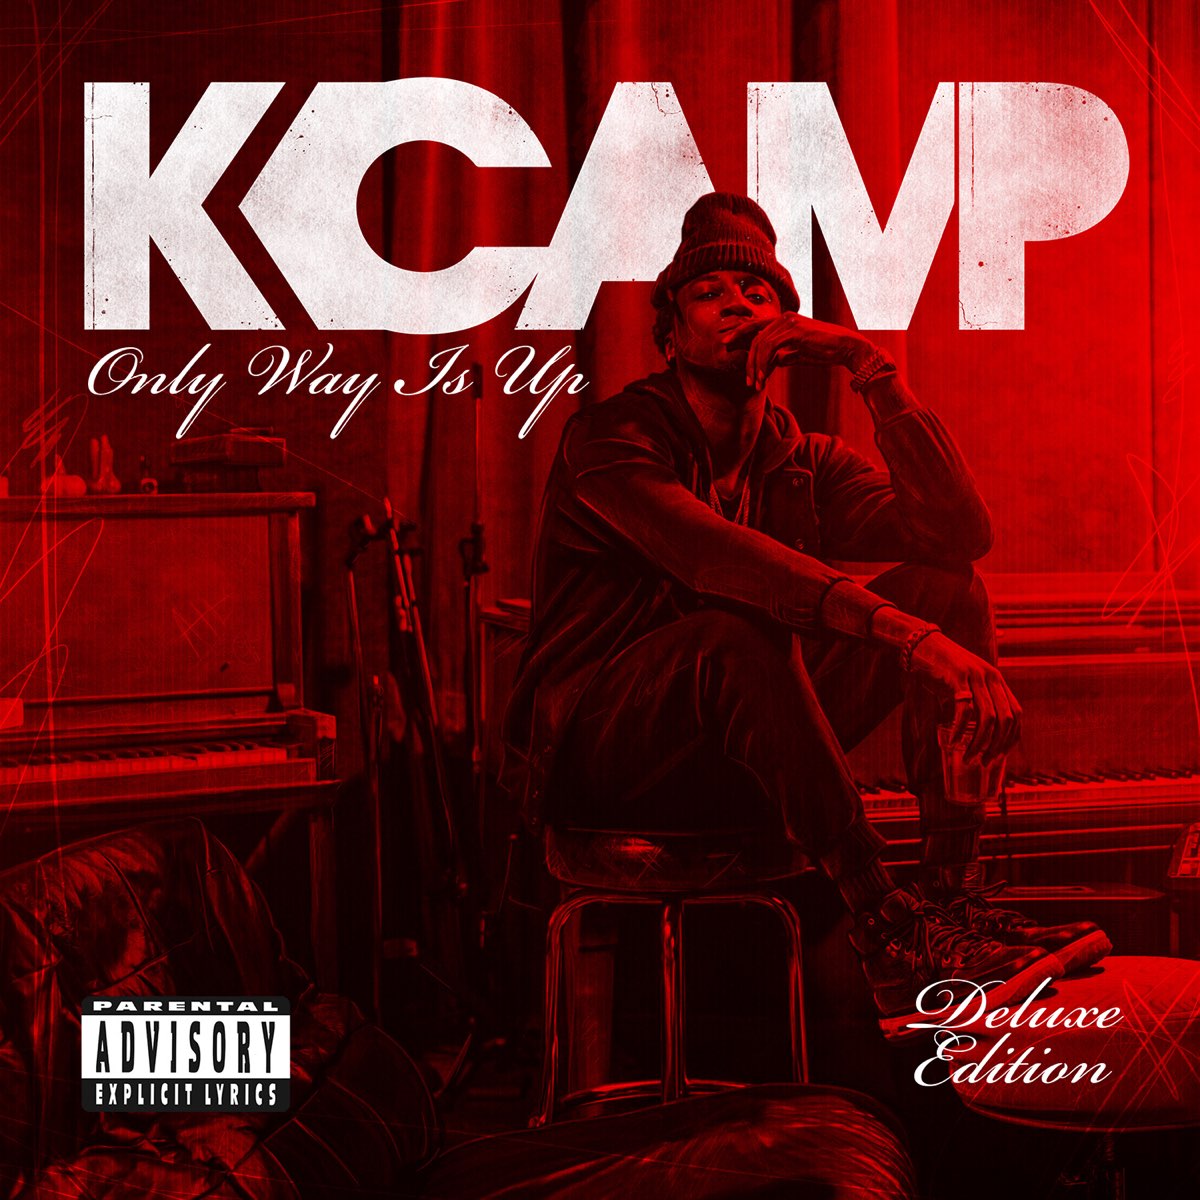 K Camp. Mixed up (Deluxe Edition). Breezy Deluxe Cover. K Camp & French Montana & Genius - money i made.